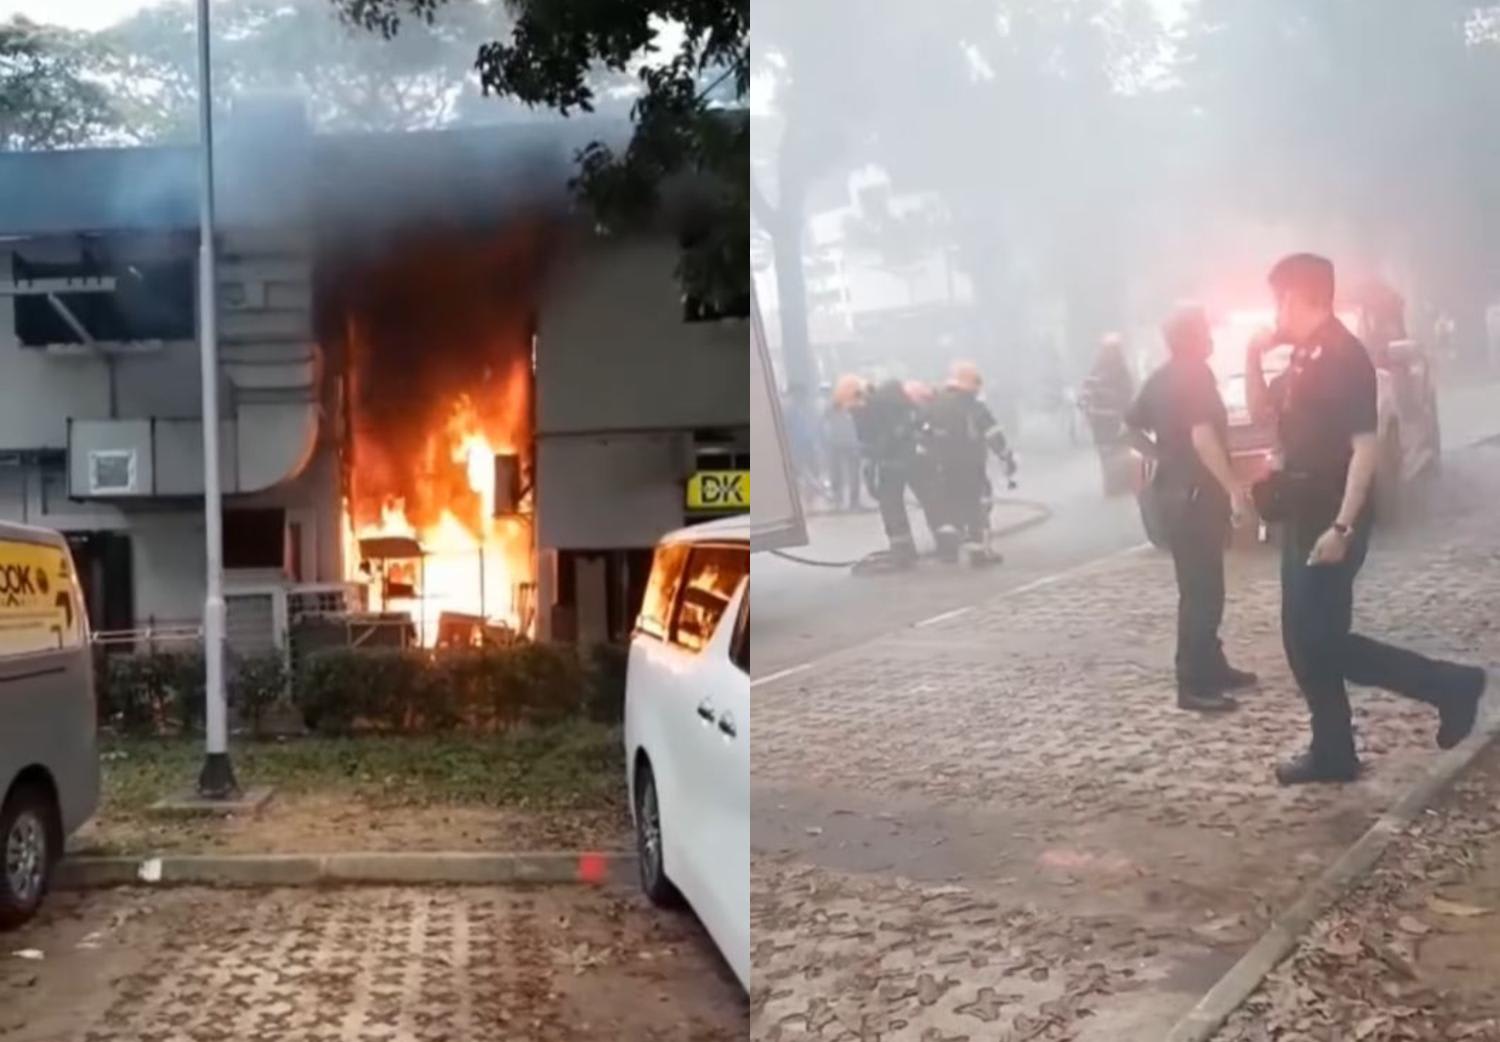 In a video posted on Facebook by Ms Camila Tan, thick plumes of smoke can be seen emitted from the raging fire taking place at the back of the two-storey block. 